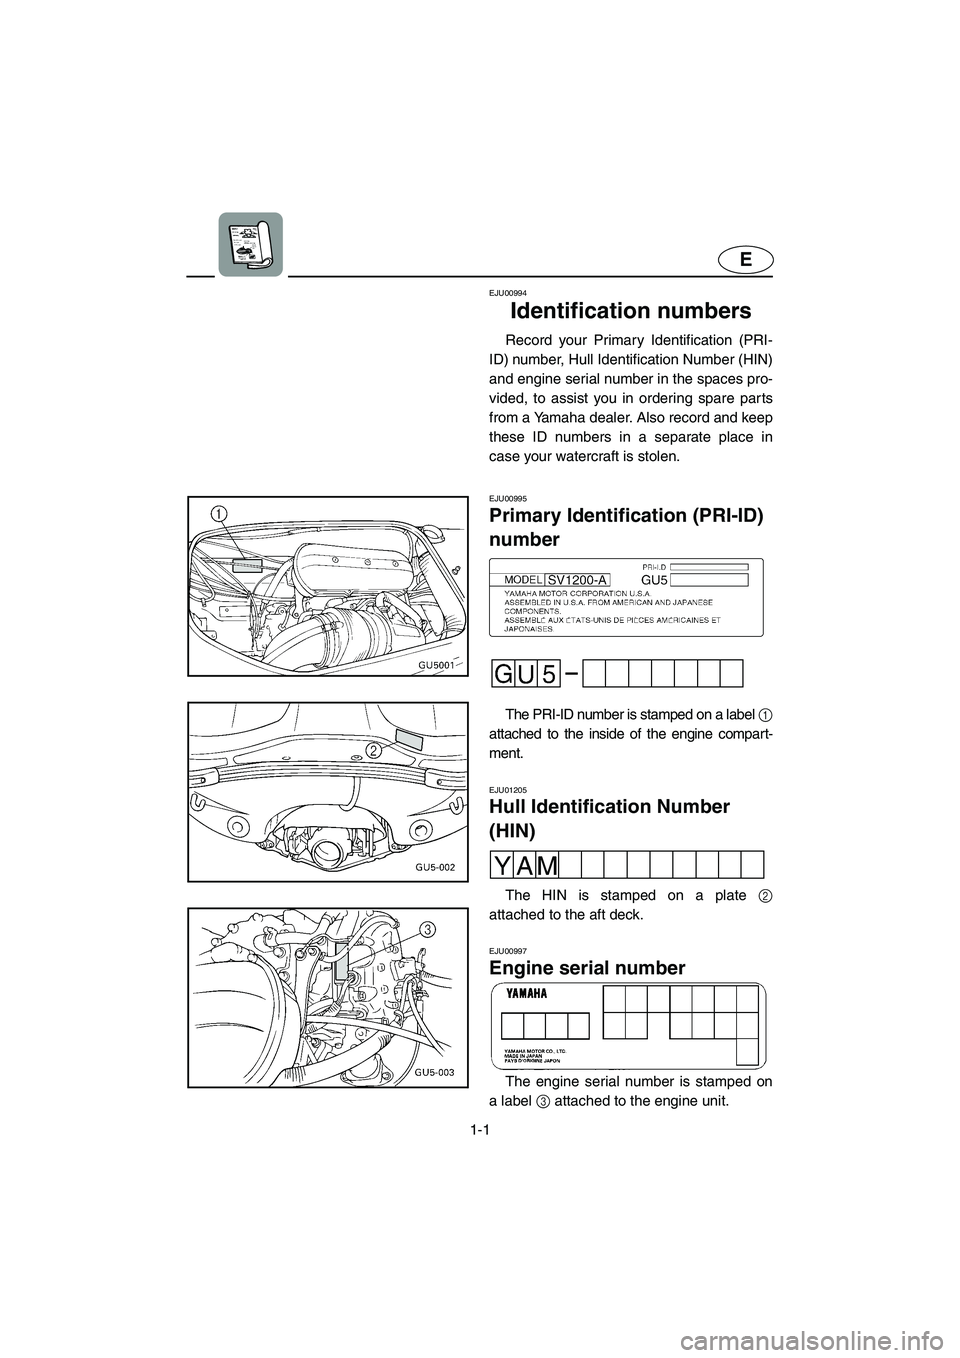 YAMAHA SUV 1200 2002  Owners Manual 1-1
E
EJU00994 
Identification numbers  
Record your Primary Identification (PRI-
ID) number, Hull Identification Number (HIN)
and engine serial number in the spaces pro-
vided, to assist you in order